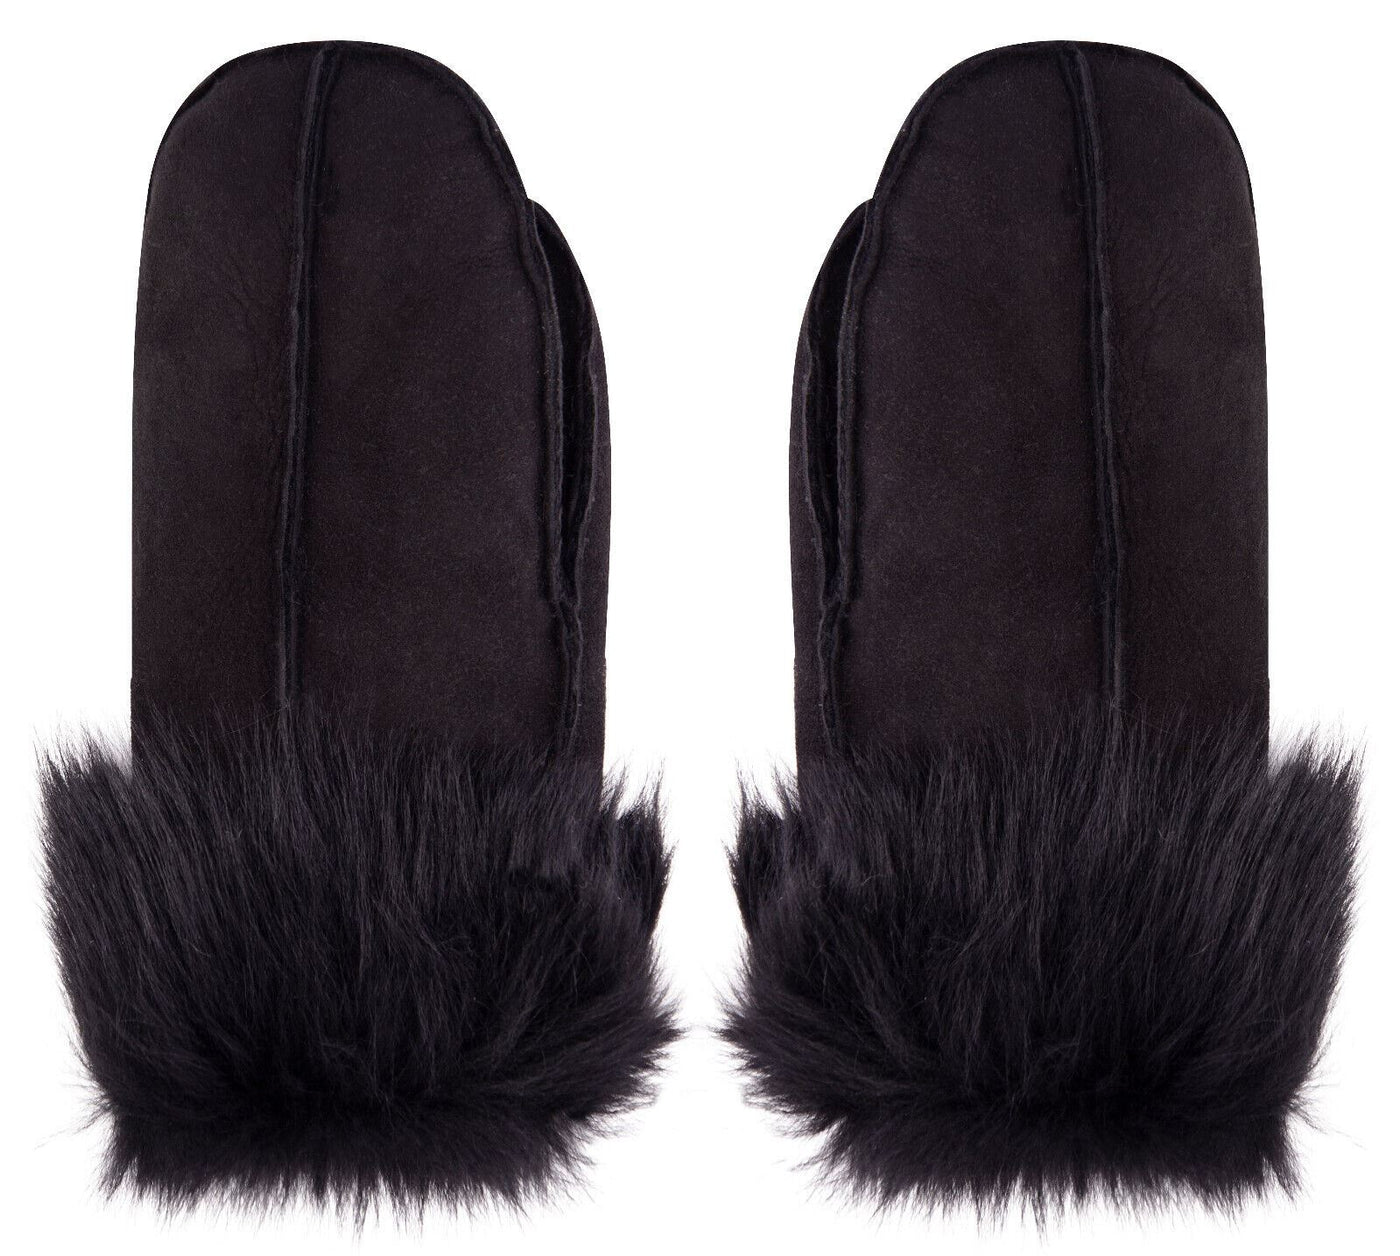 Handmade REAL LEATHER SHEEPSKIN MITTENS SHEARLING BLACK MITTS GLOVES THICK WARM